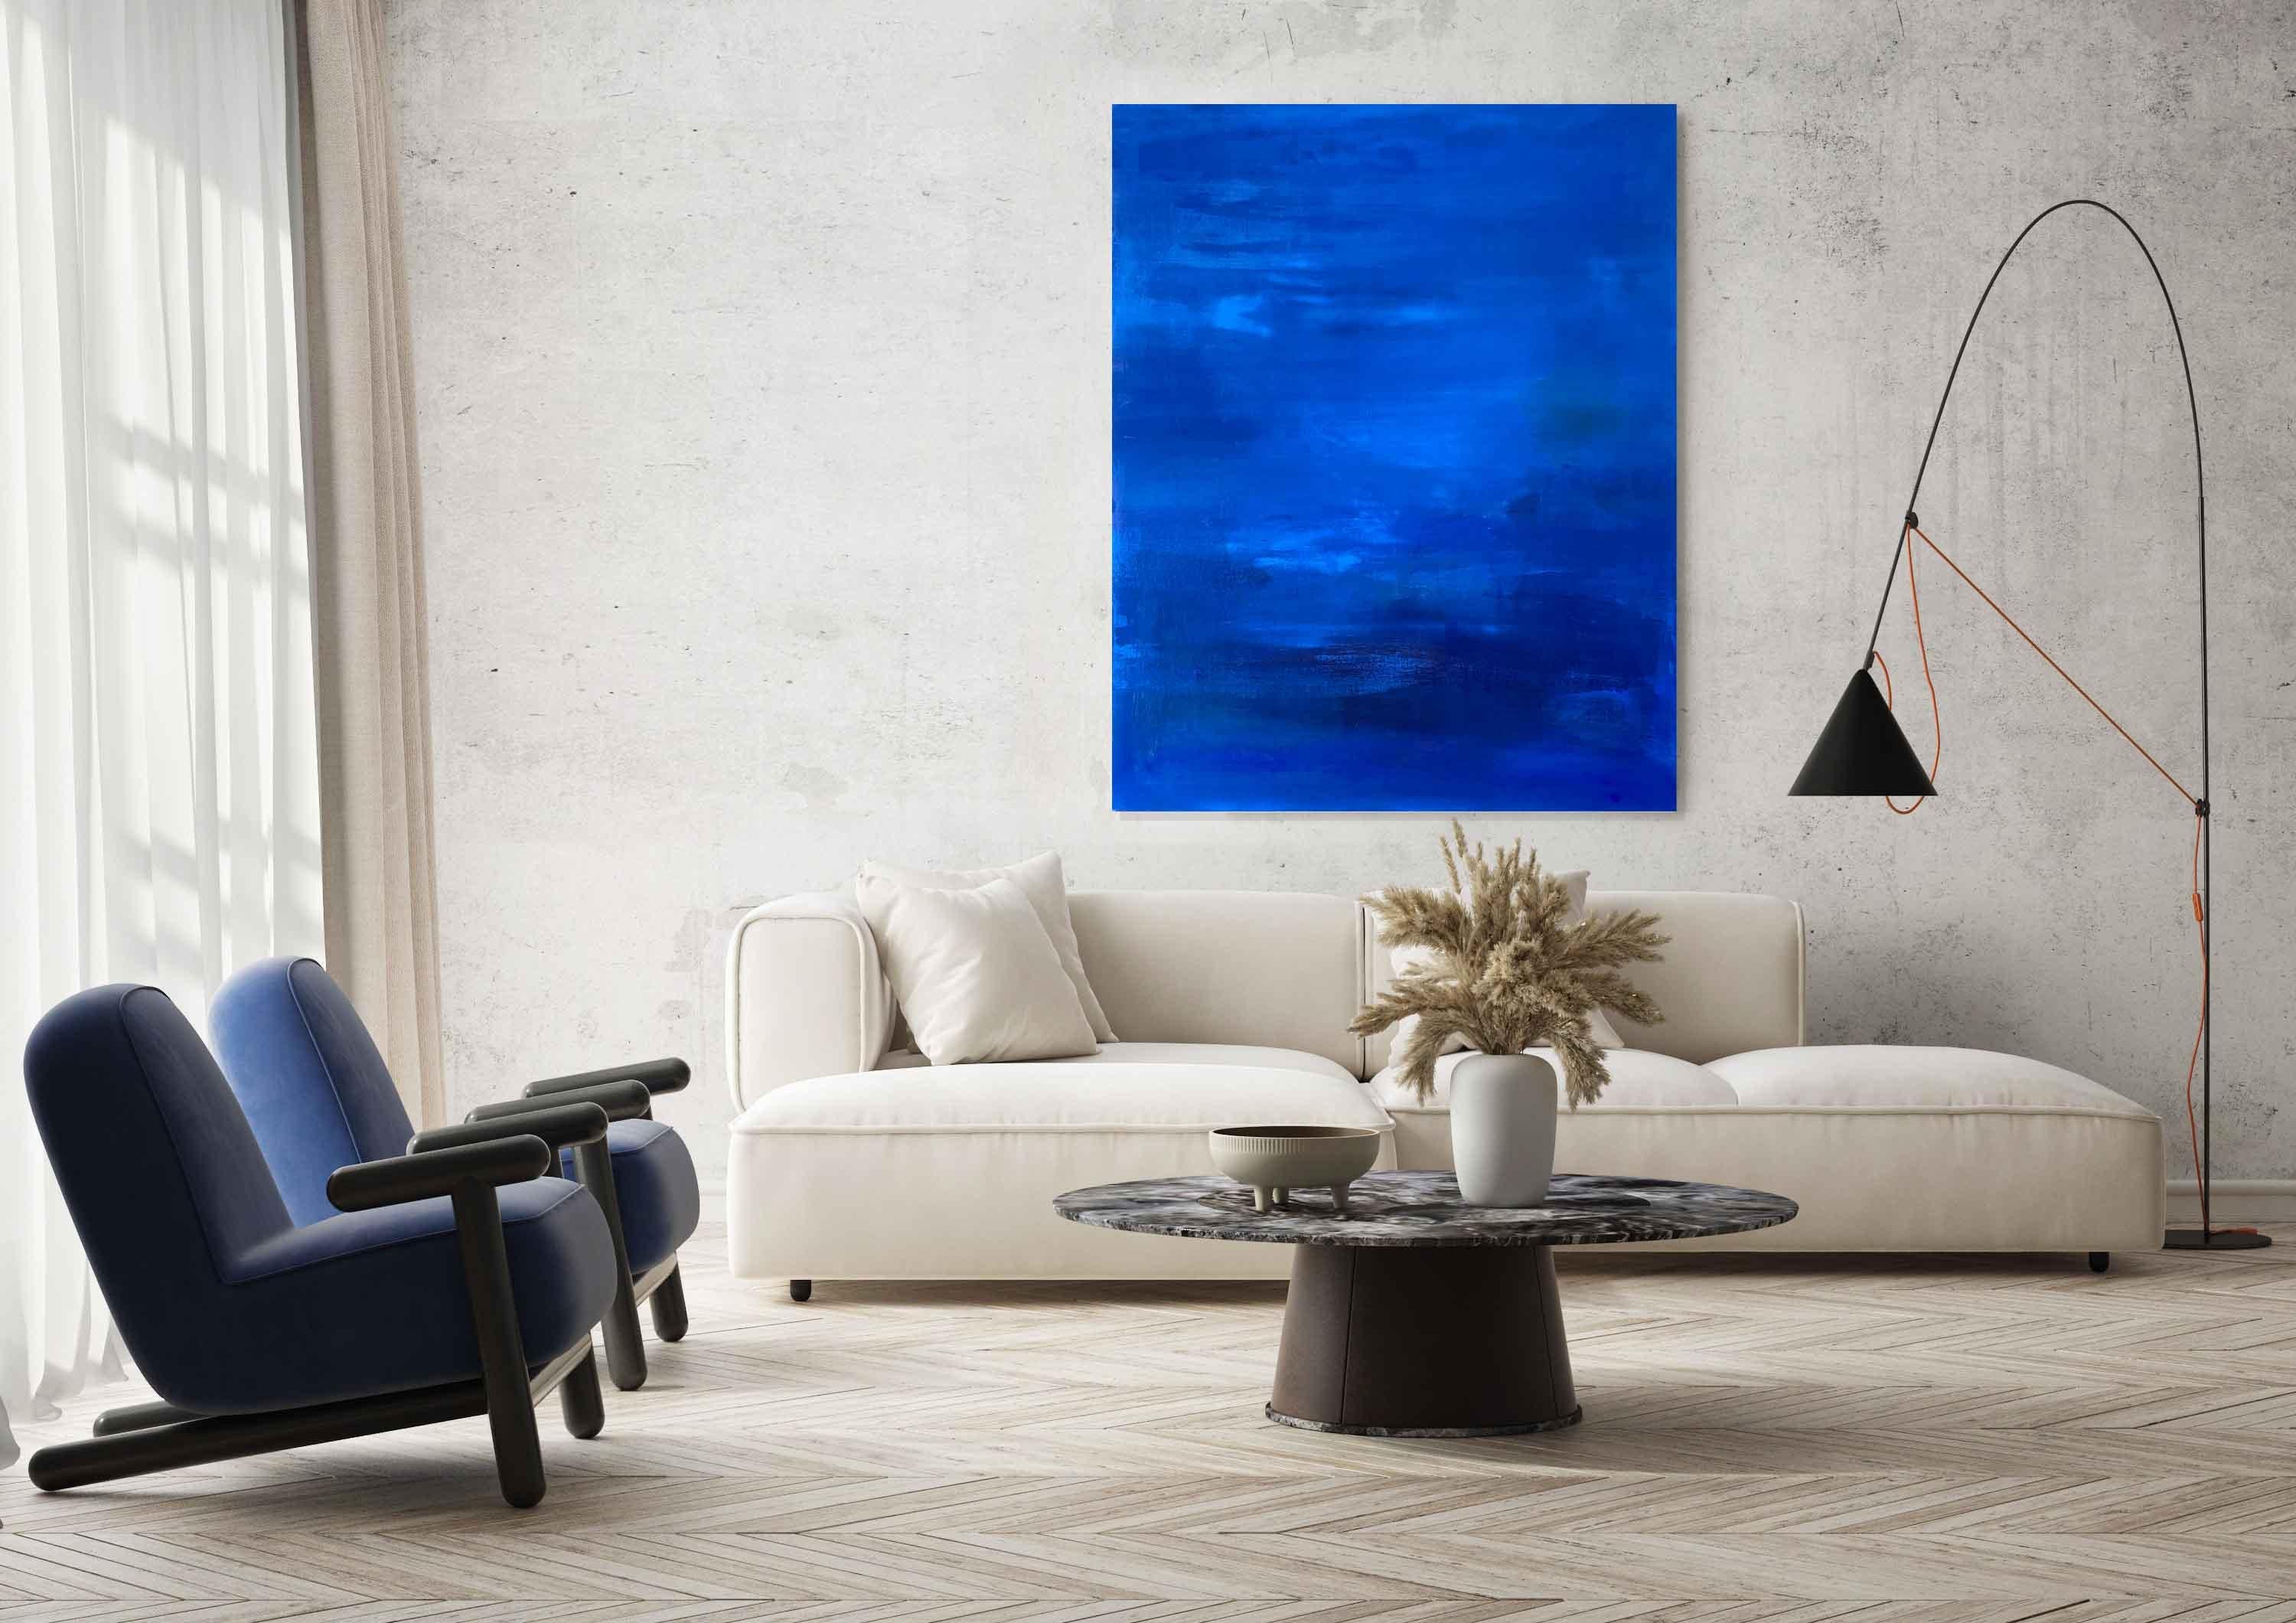 Big Blue cobalt large scale minimalist abstract painting statement artwork - Painting by Kathleen Rhee